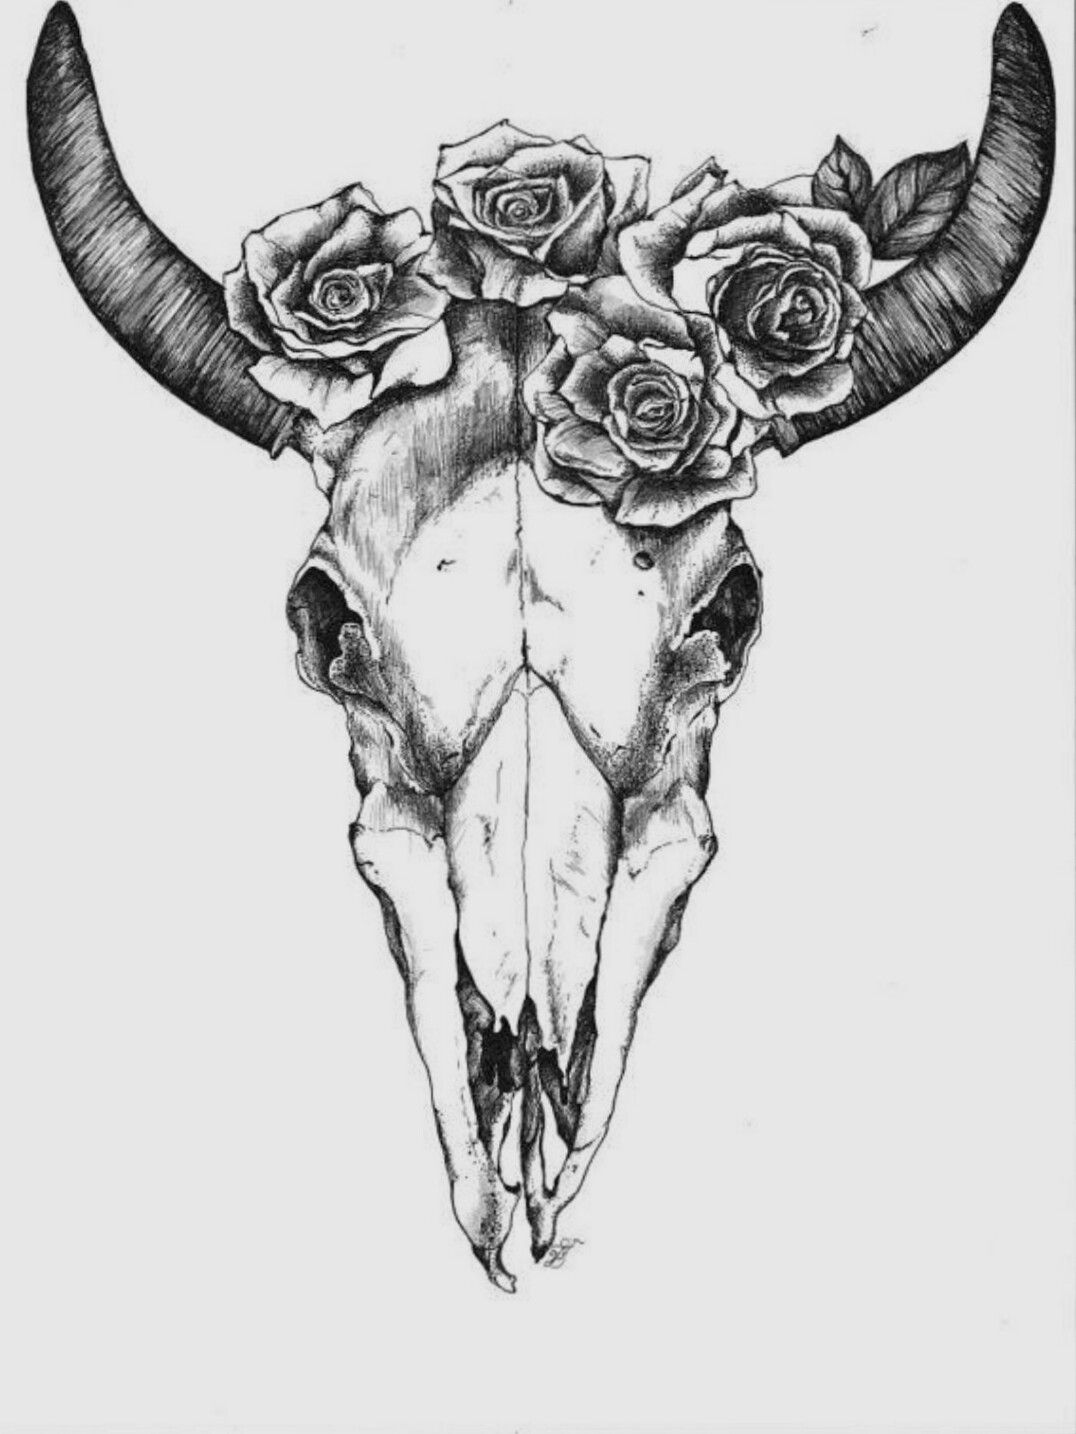 Taurus Skull Images Browse 1991 Stock Photos  Vectors Free Download with  Trial  Shutterstock